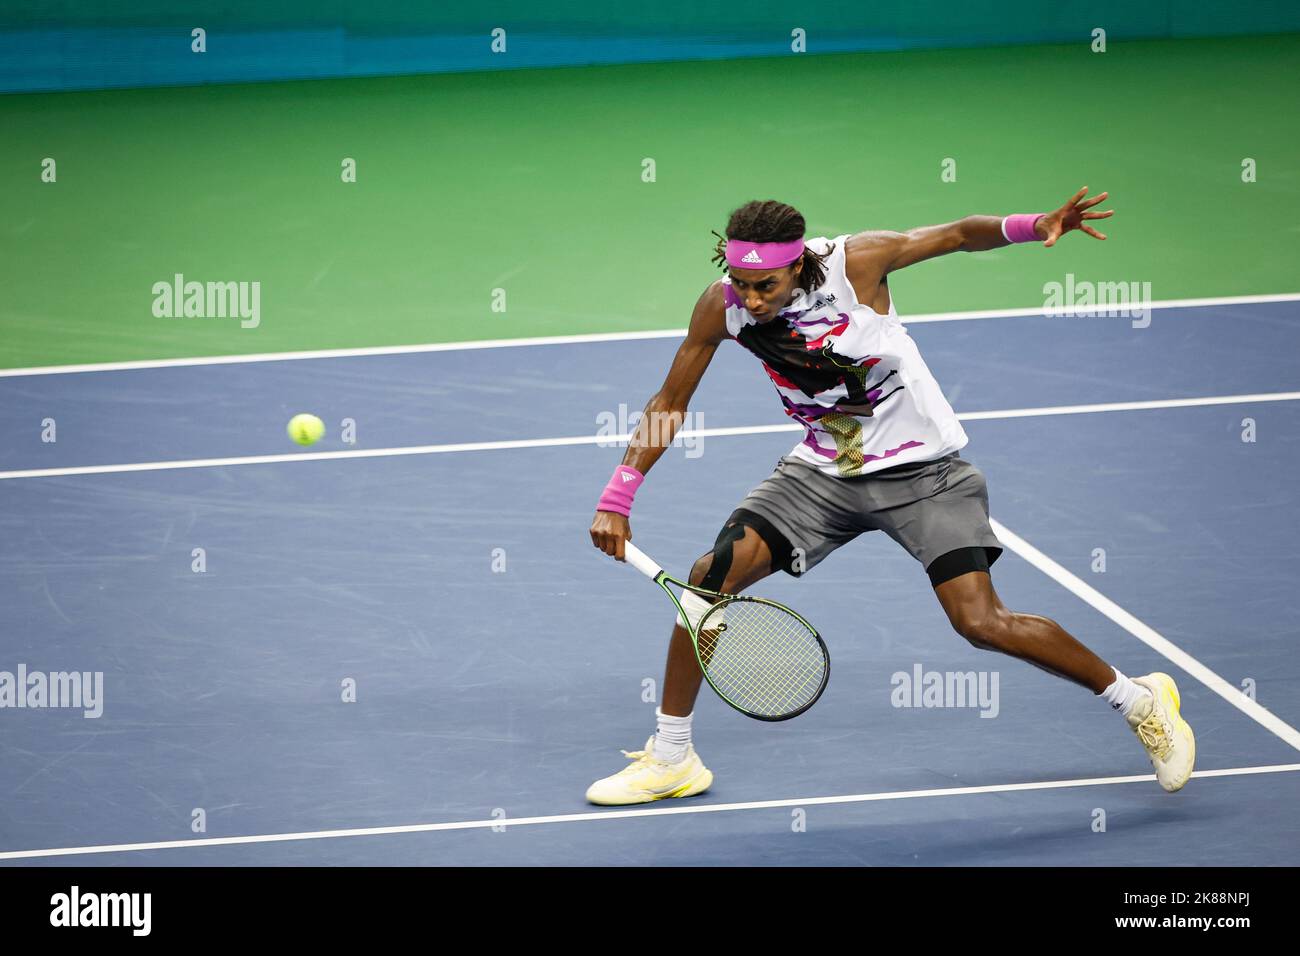 Mikael Ymer of Sweden in action against Stefanos Tsitsipas of Greece during their quarterfinal tennis match at the Stockholm Open tennis tournament i Stock Photo